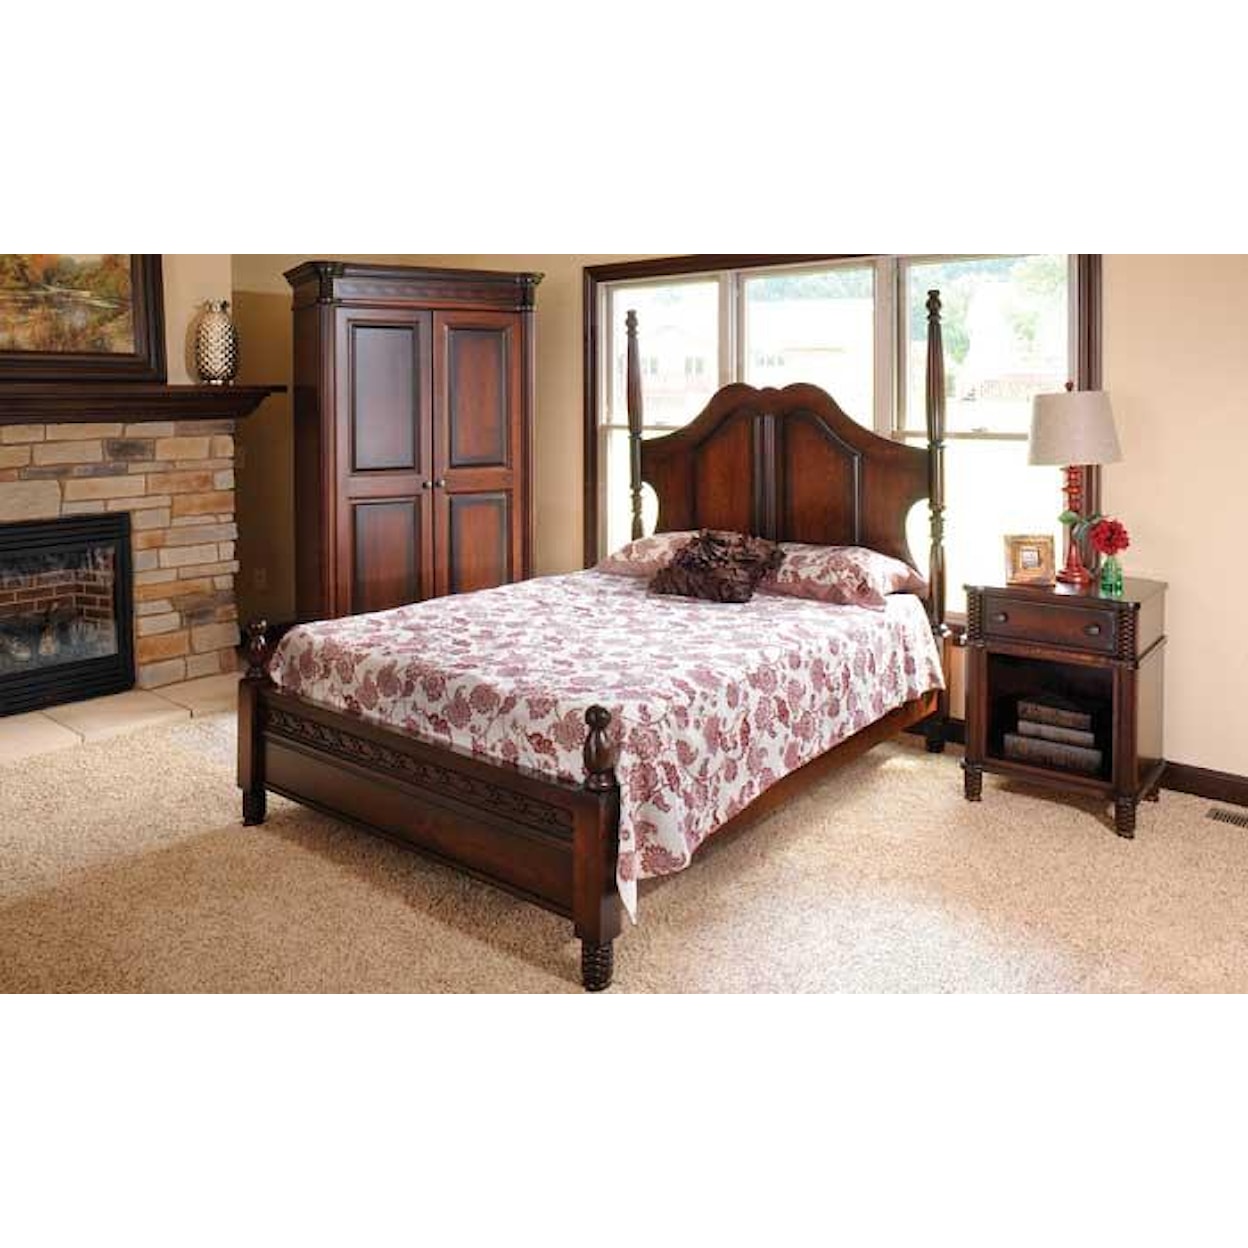 The Urban Collection New Generations Queen Bedroom Group